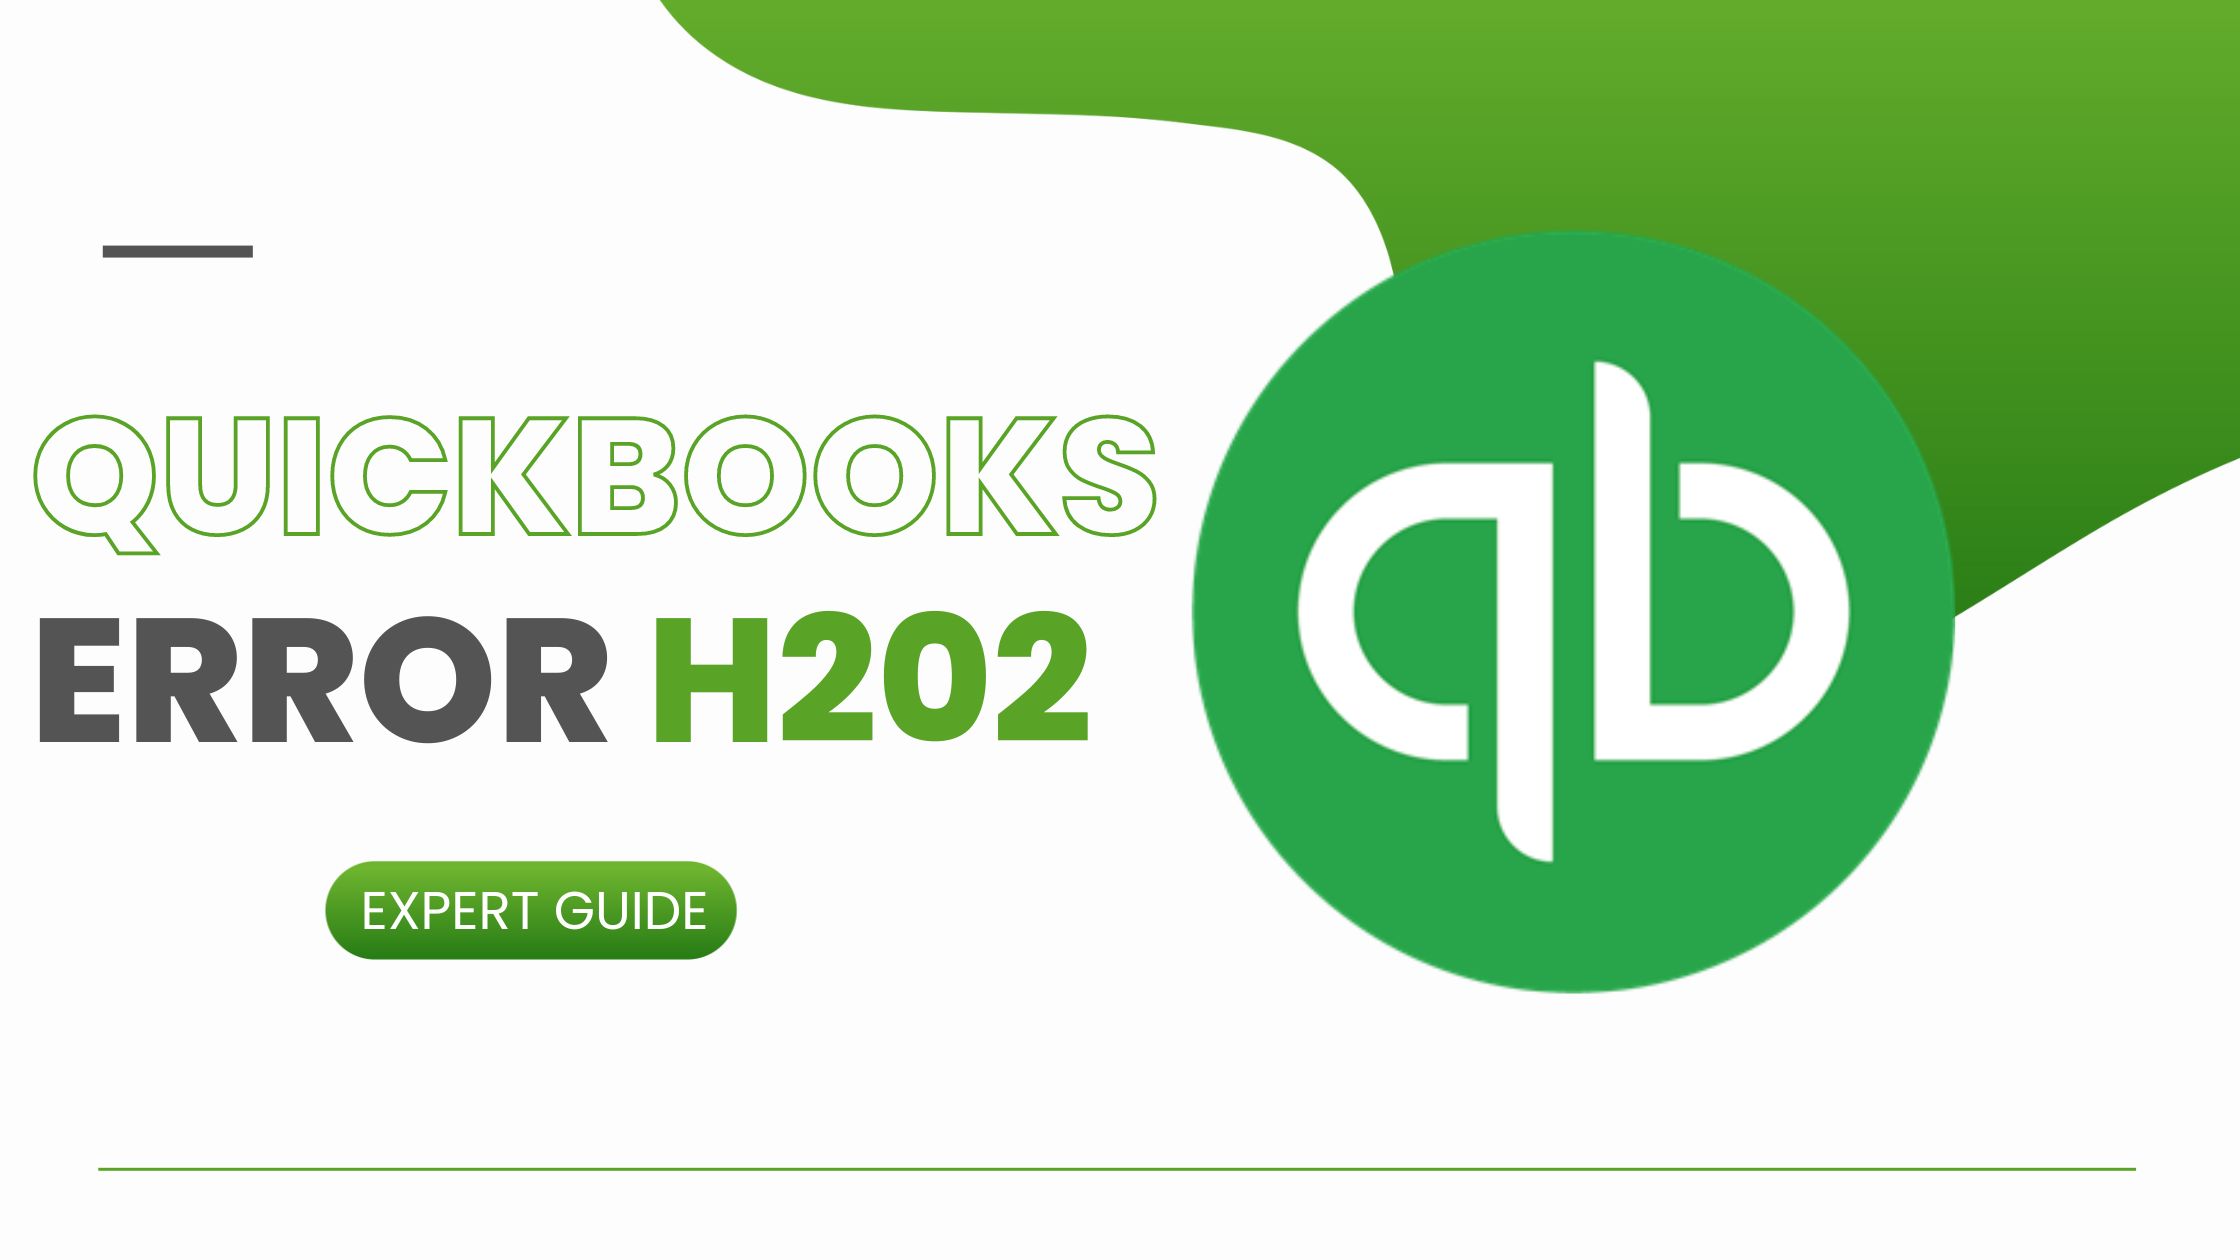 The Ultimate QuickBooks Error H202 Survival Guide for Business Owners